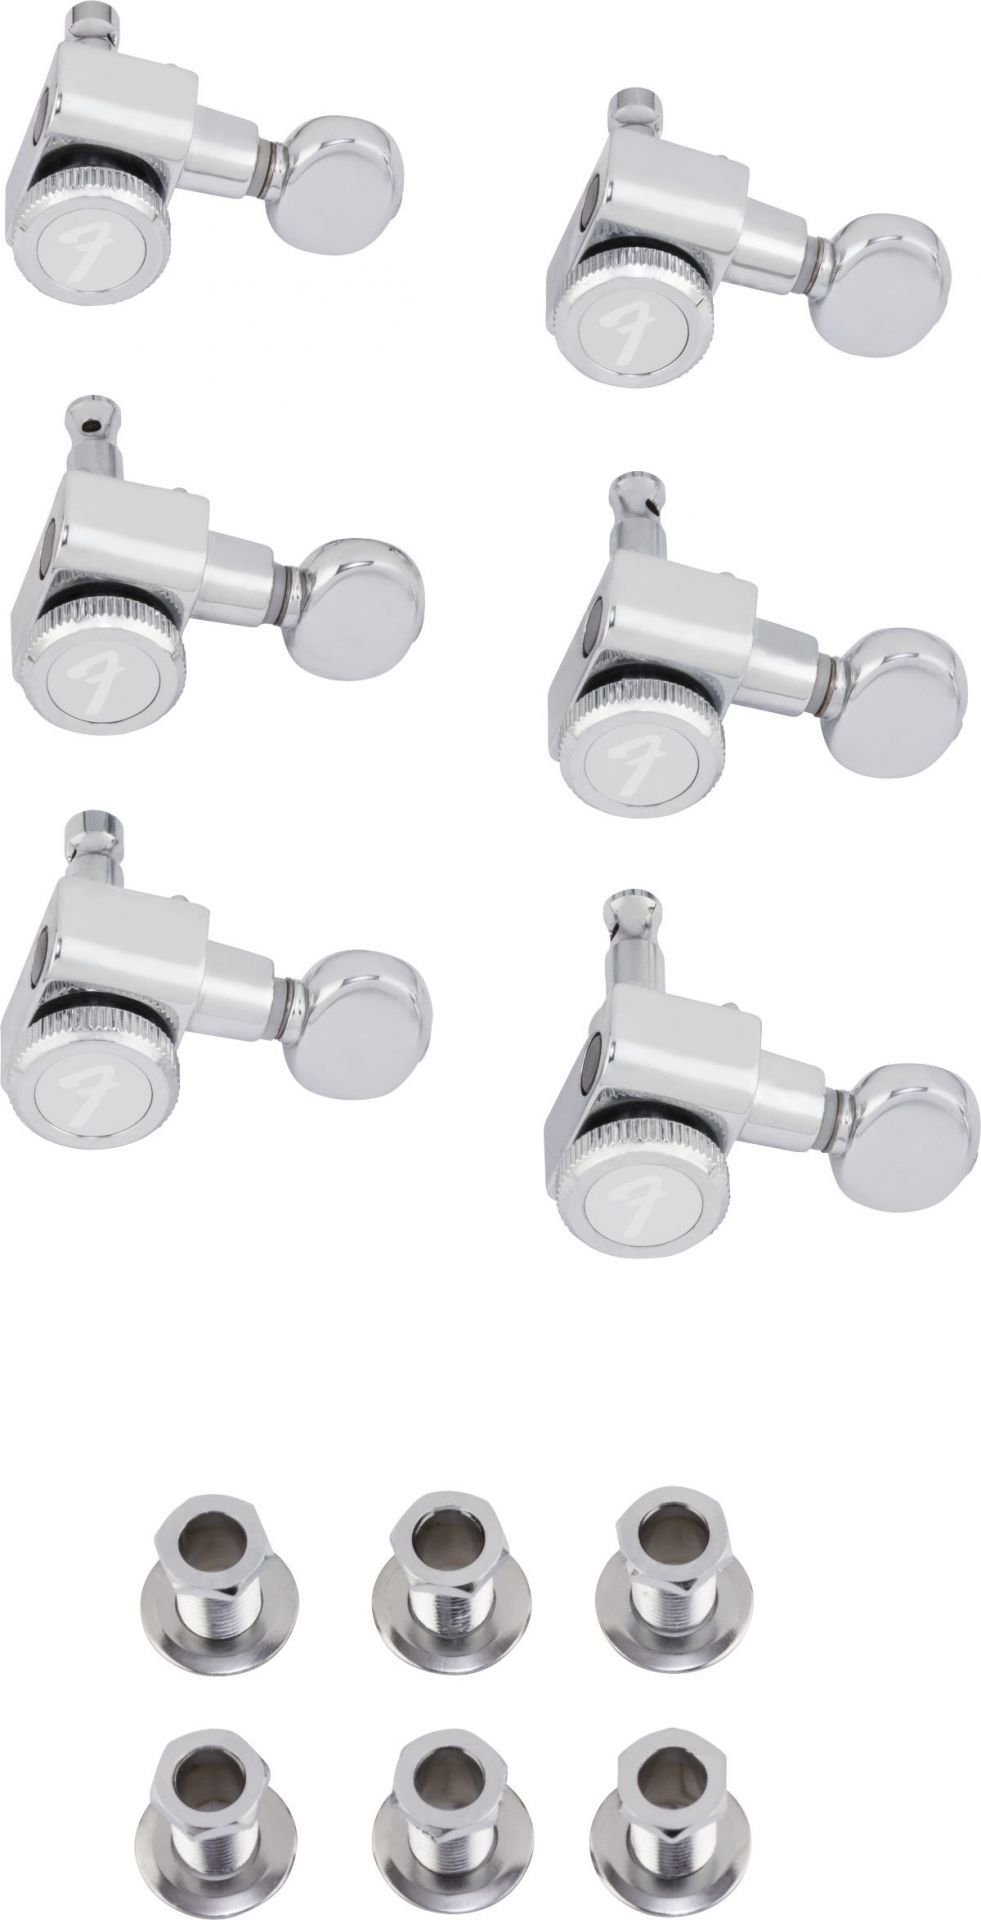 Fender Locking Stratocaster/Telecaster Tuning Machines Vintage Buttons Polished Chrome